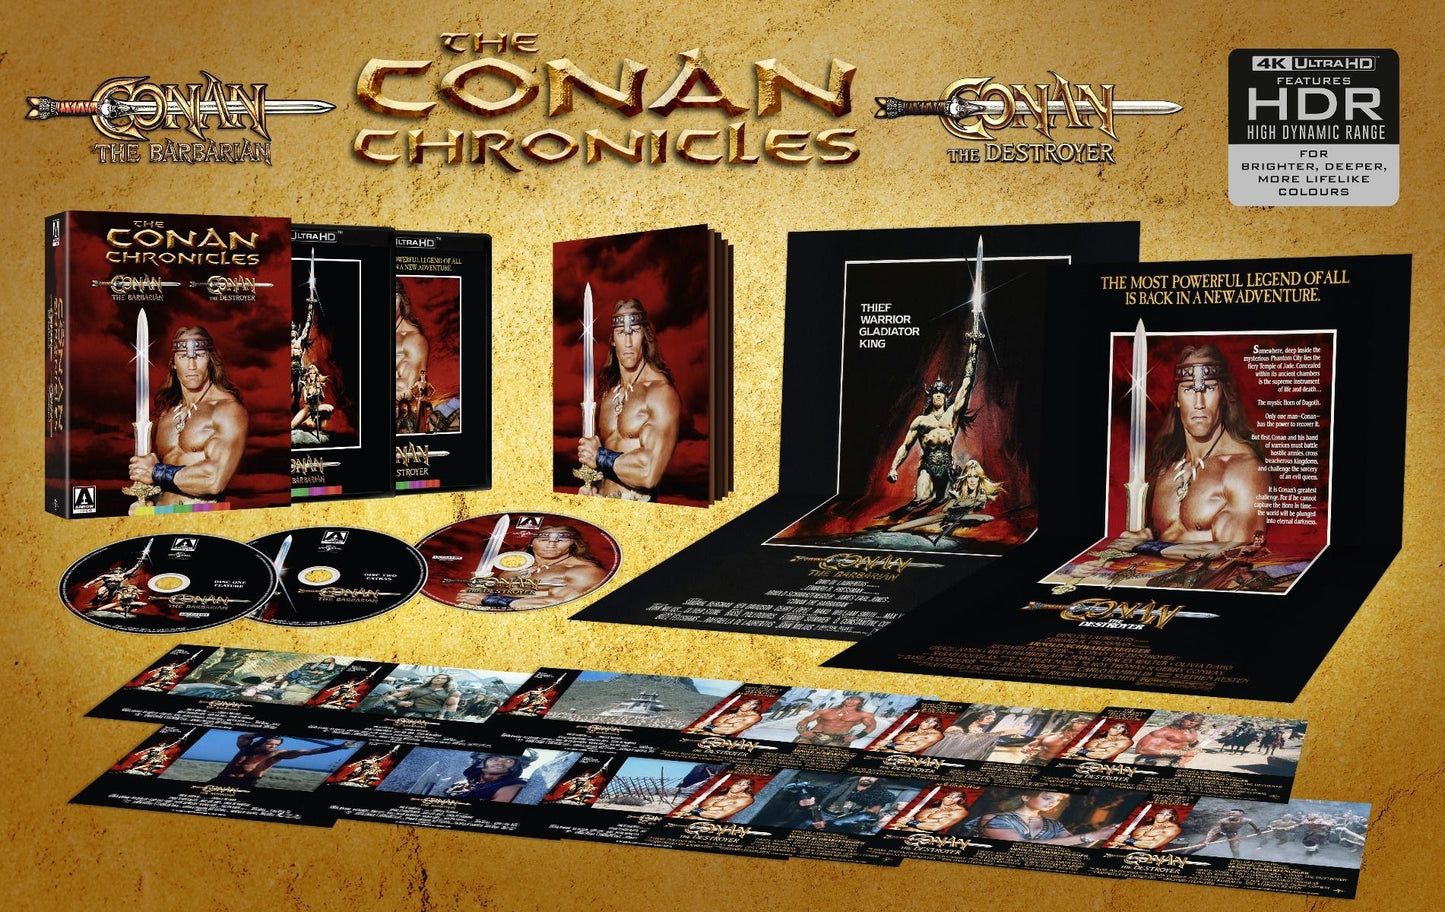 The Conan Chronicles 4K: Limited Edition